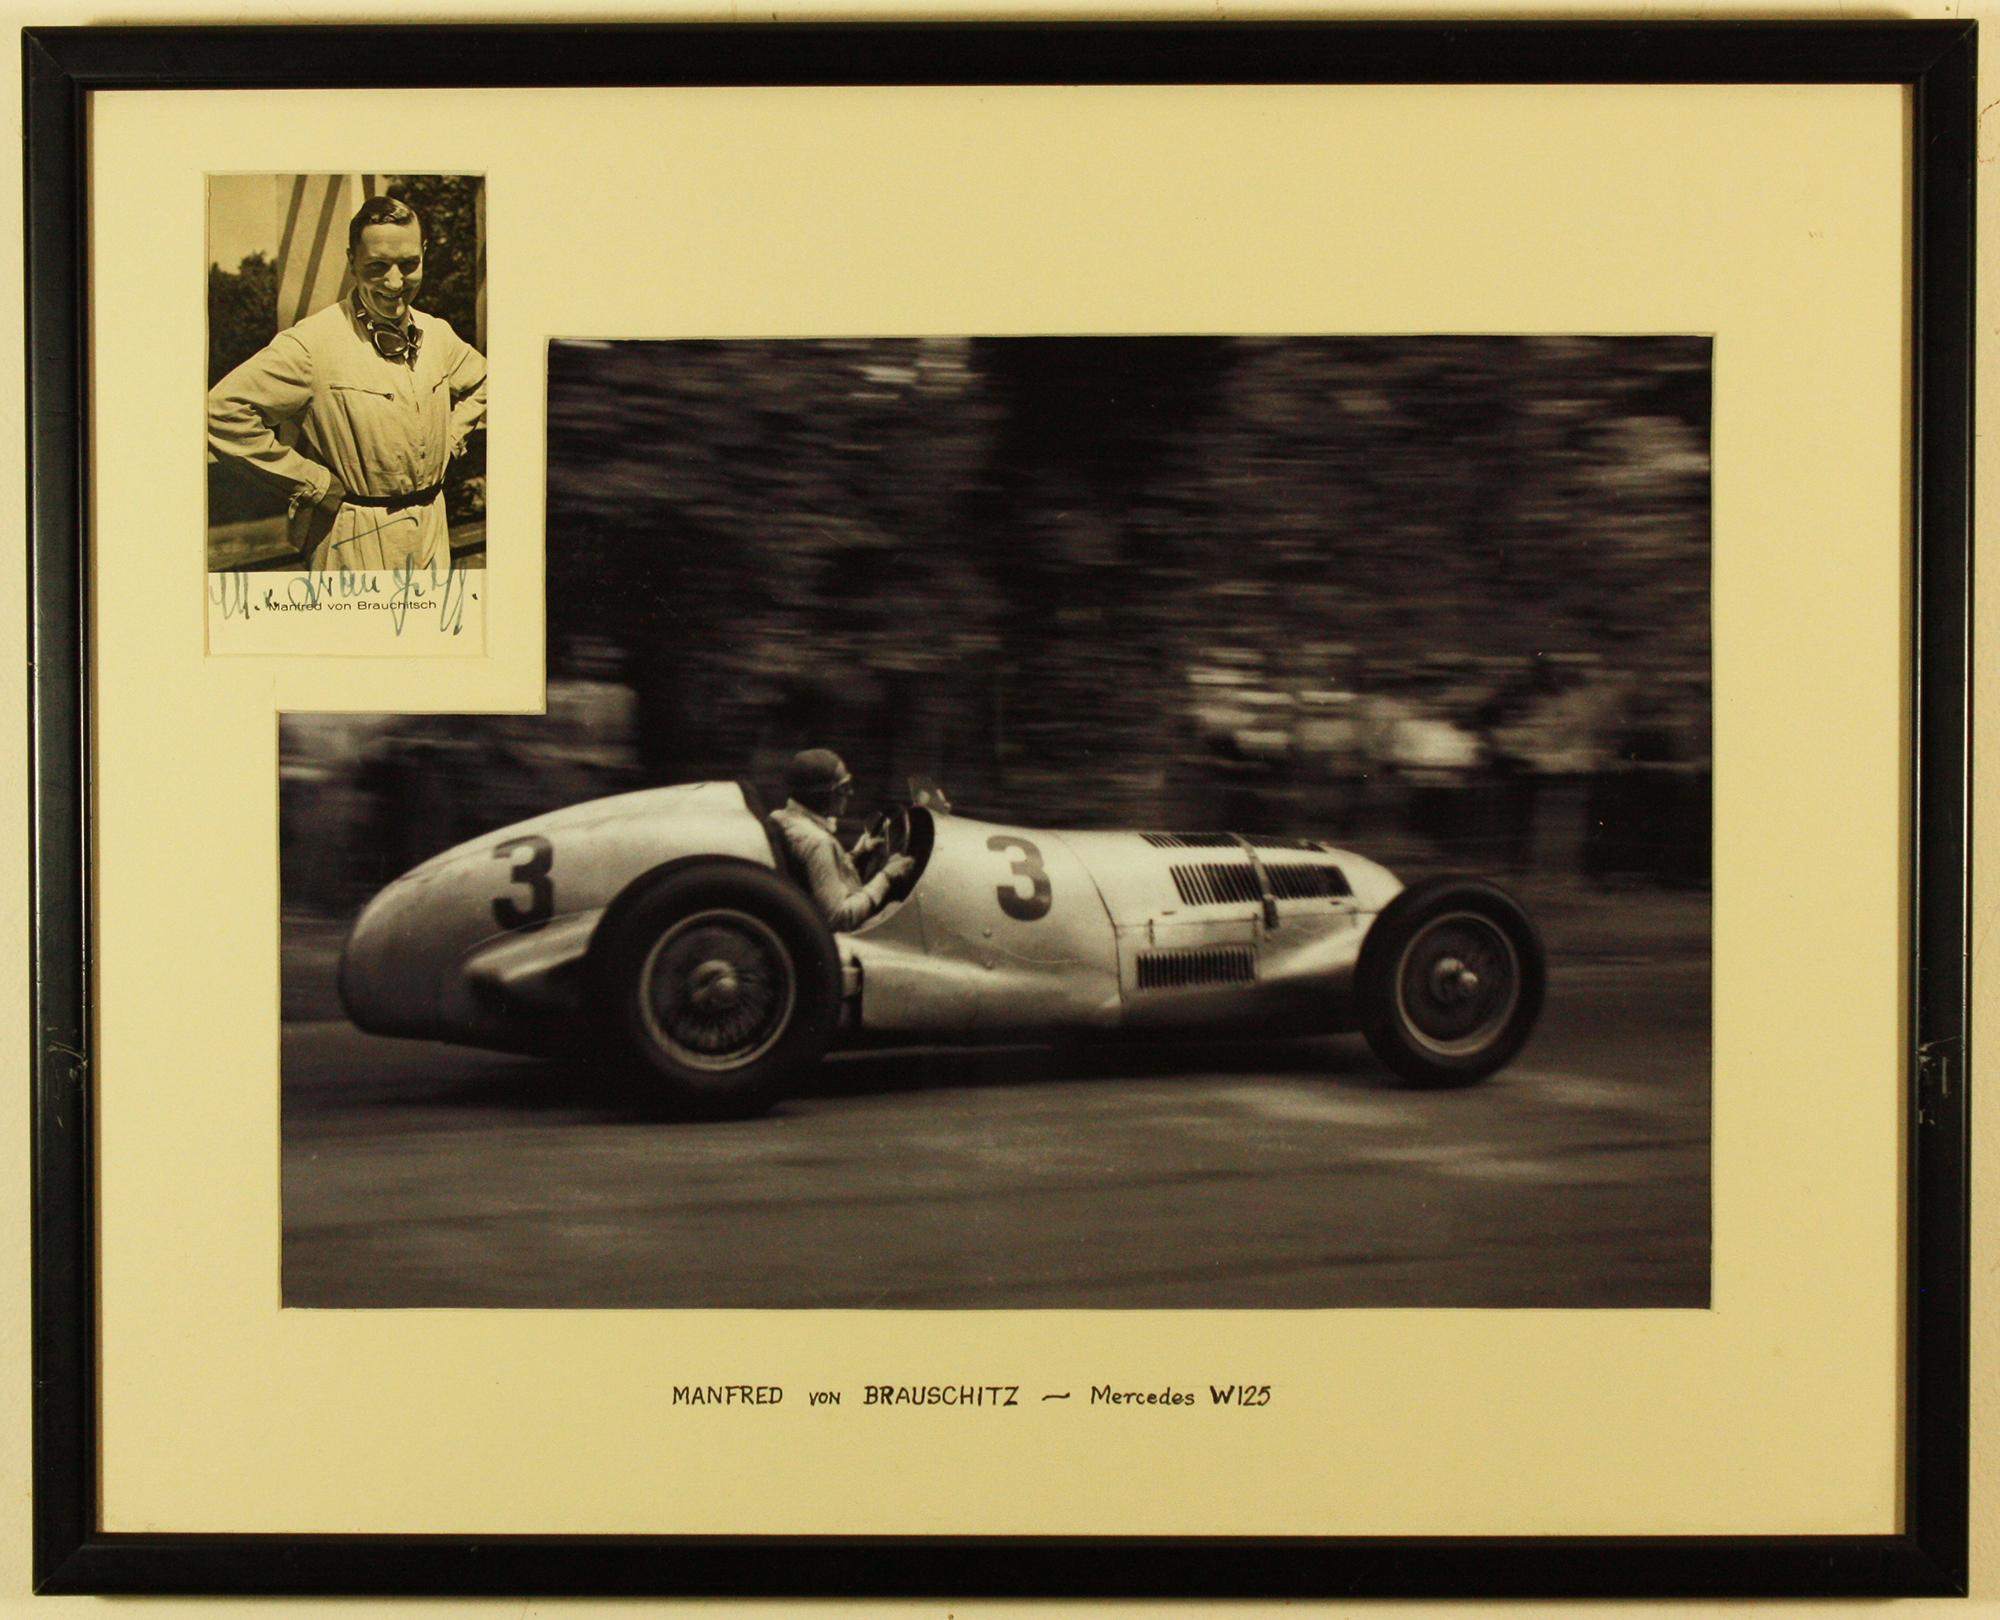 Unknown Black and White Photograph - Manfred Von Brauschitz 1937 Donington Grand Prix, with inset signed Photo